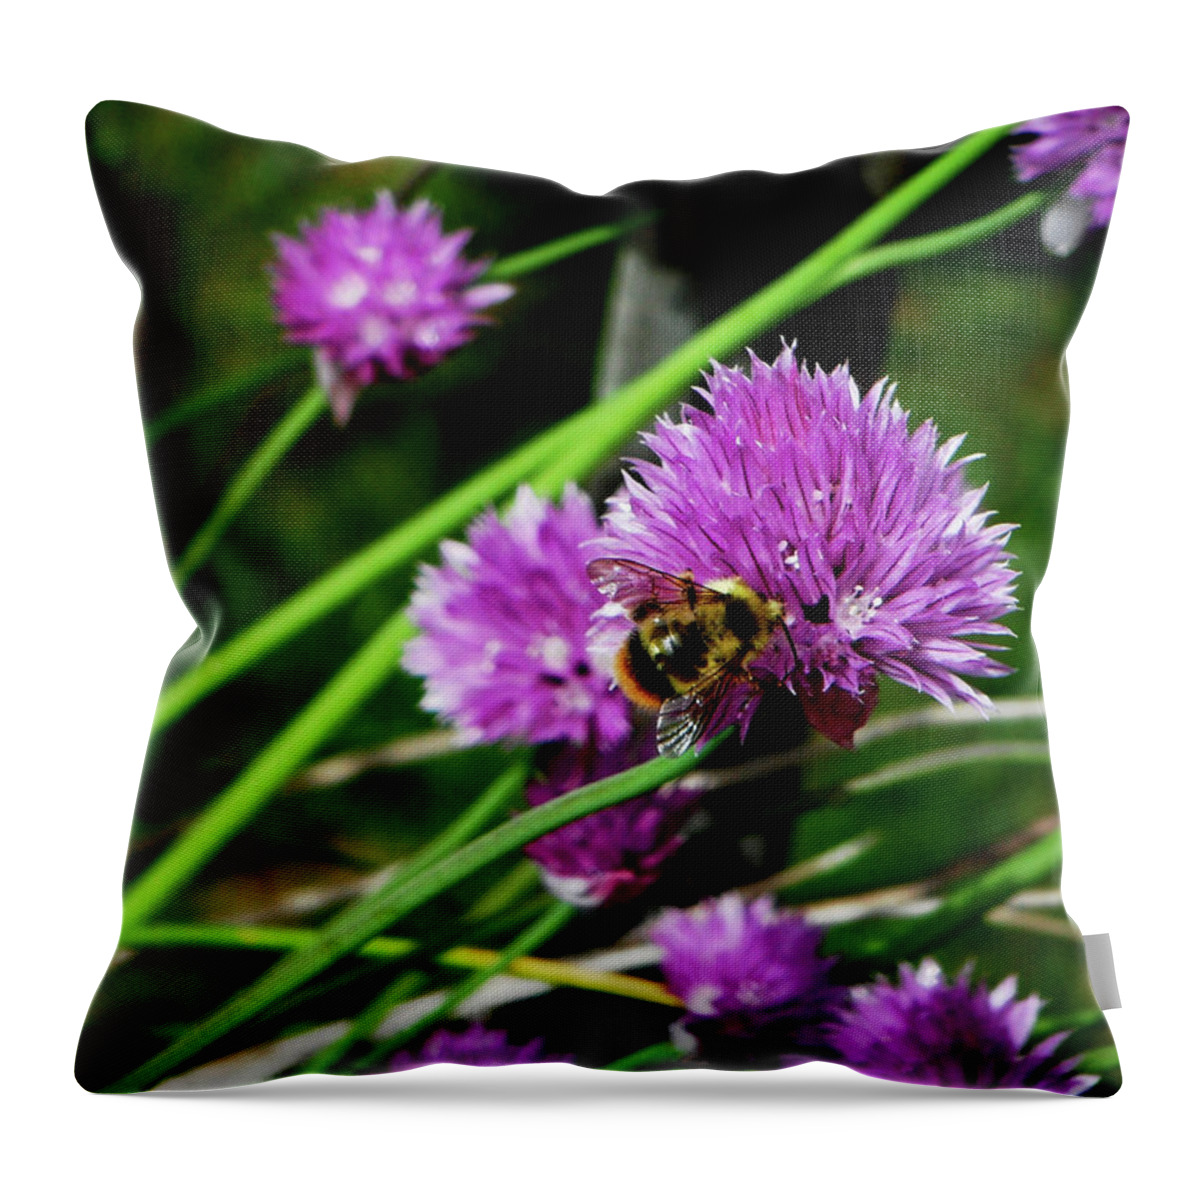 Flowers Throw Pillow featuring the photograph Garlic Chive by Segura Shaw Photography